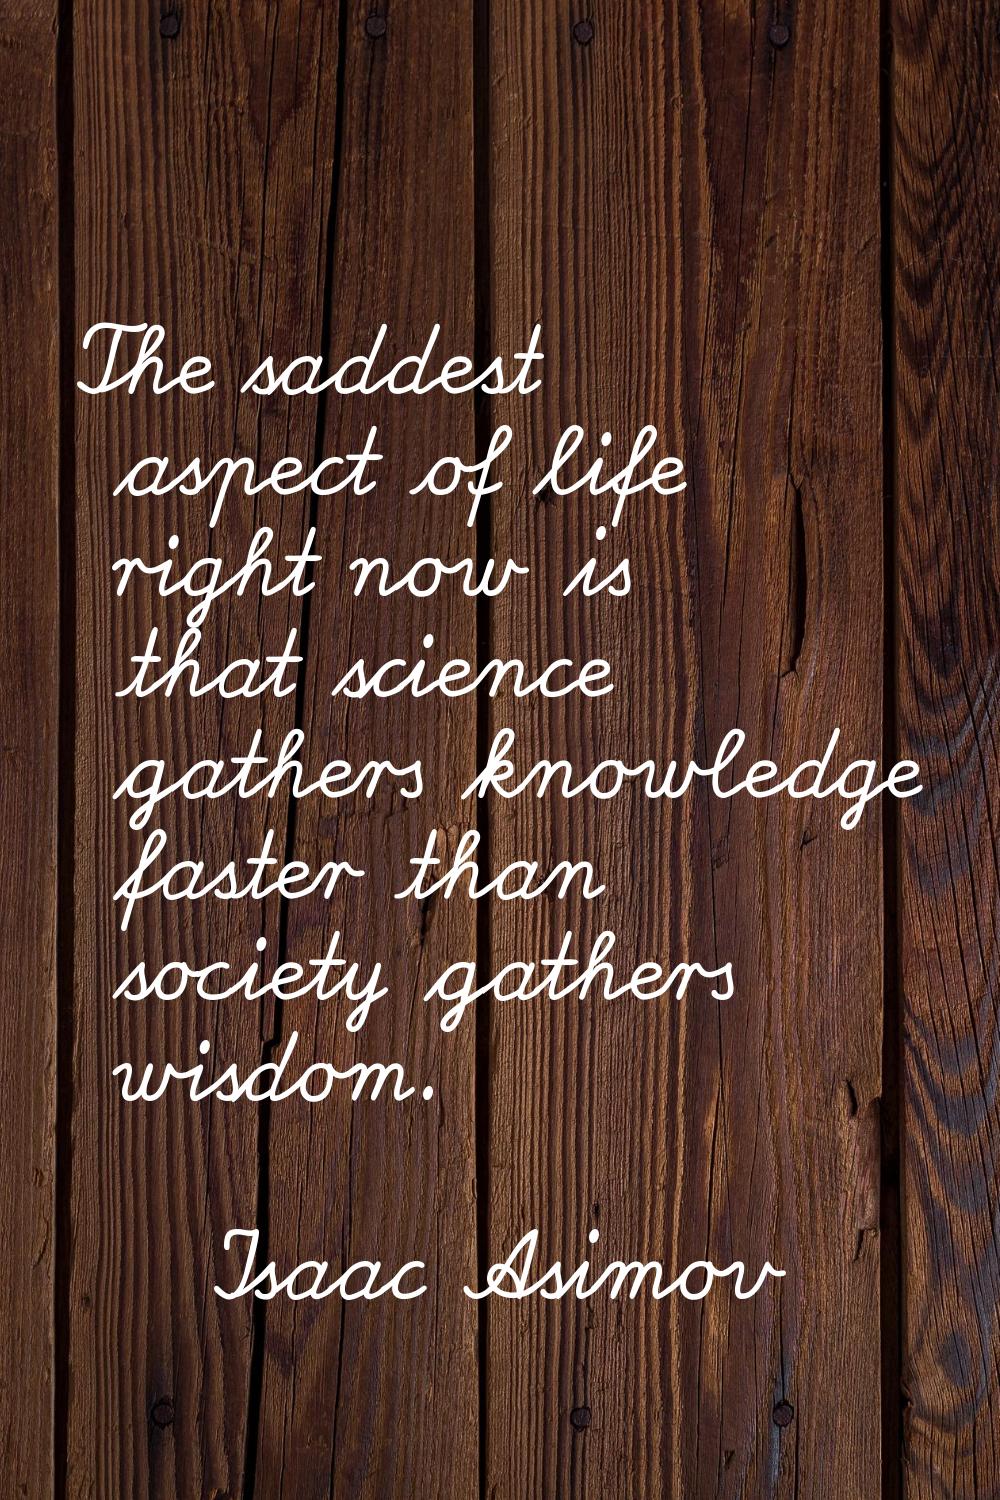 The saddest aspect of life right now is that science gathers knowledge faster than society gathers 